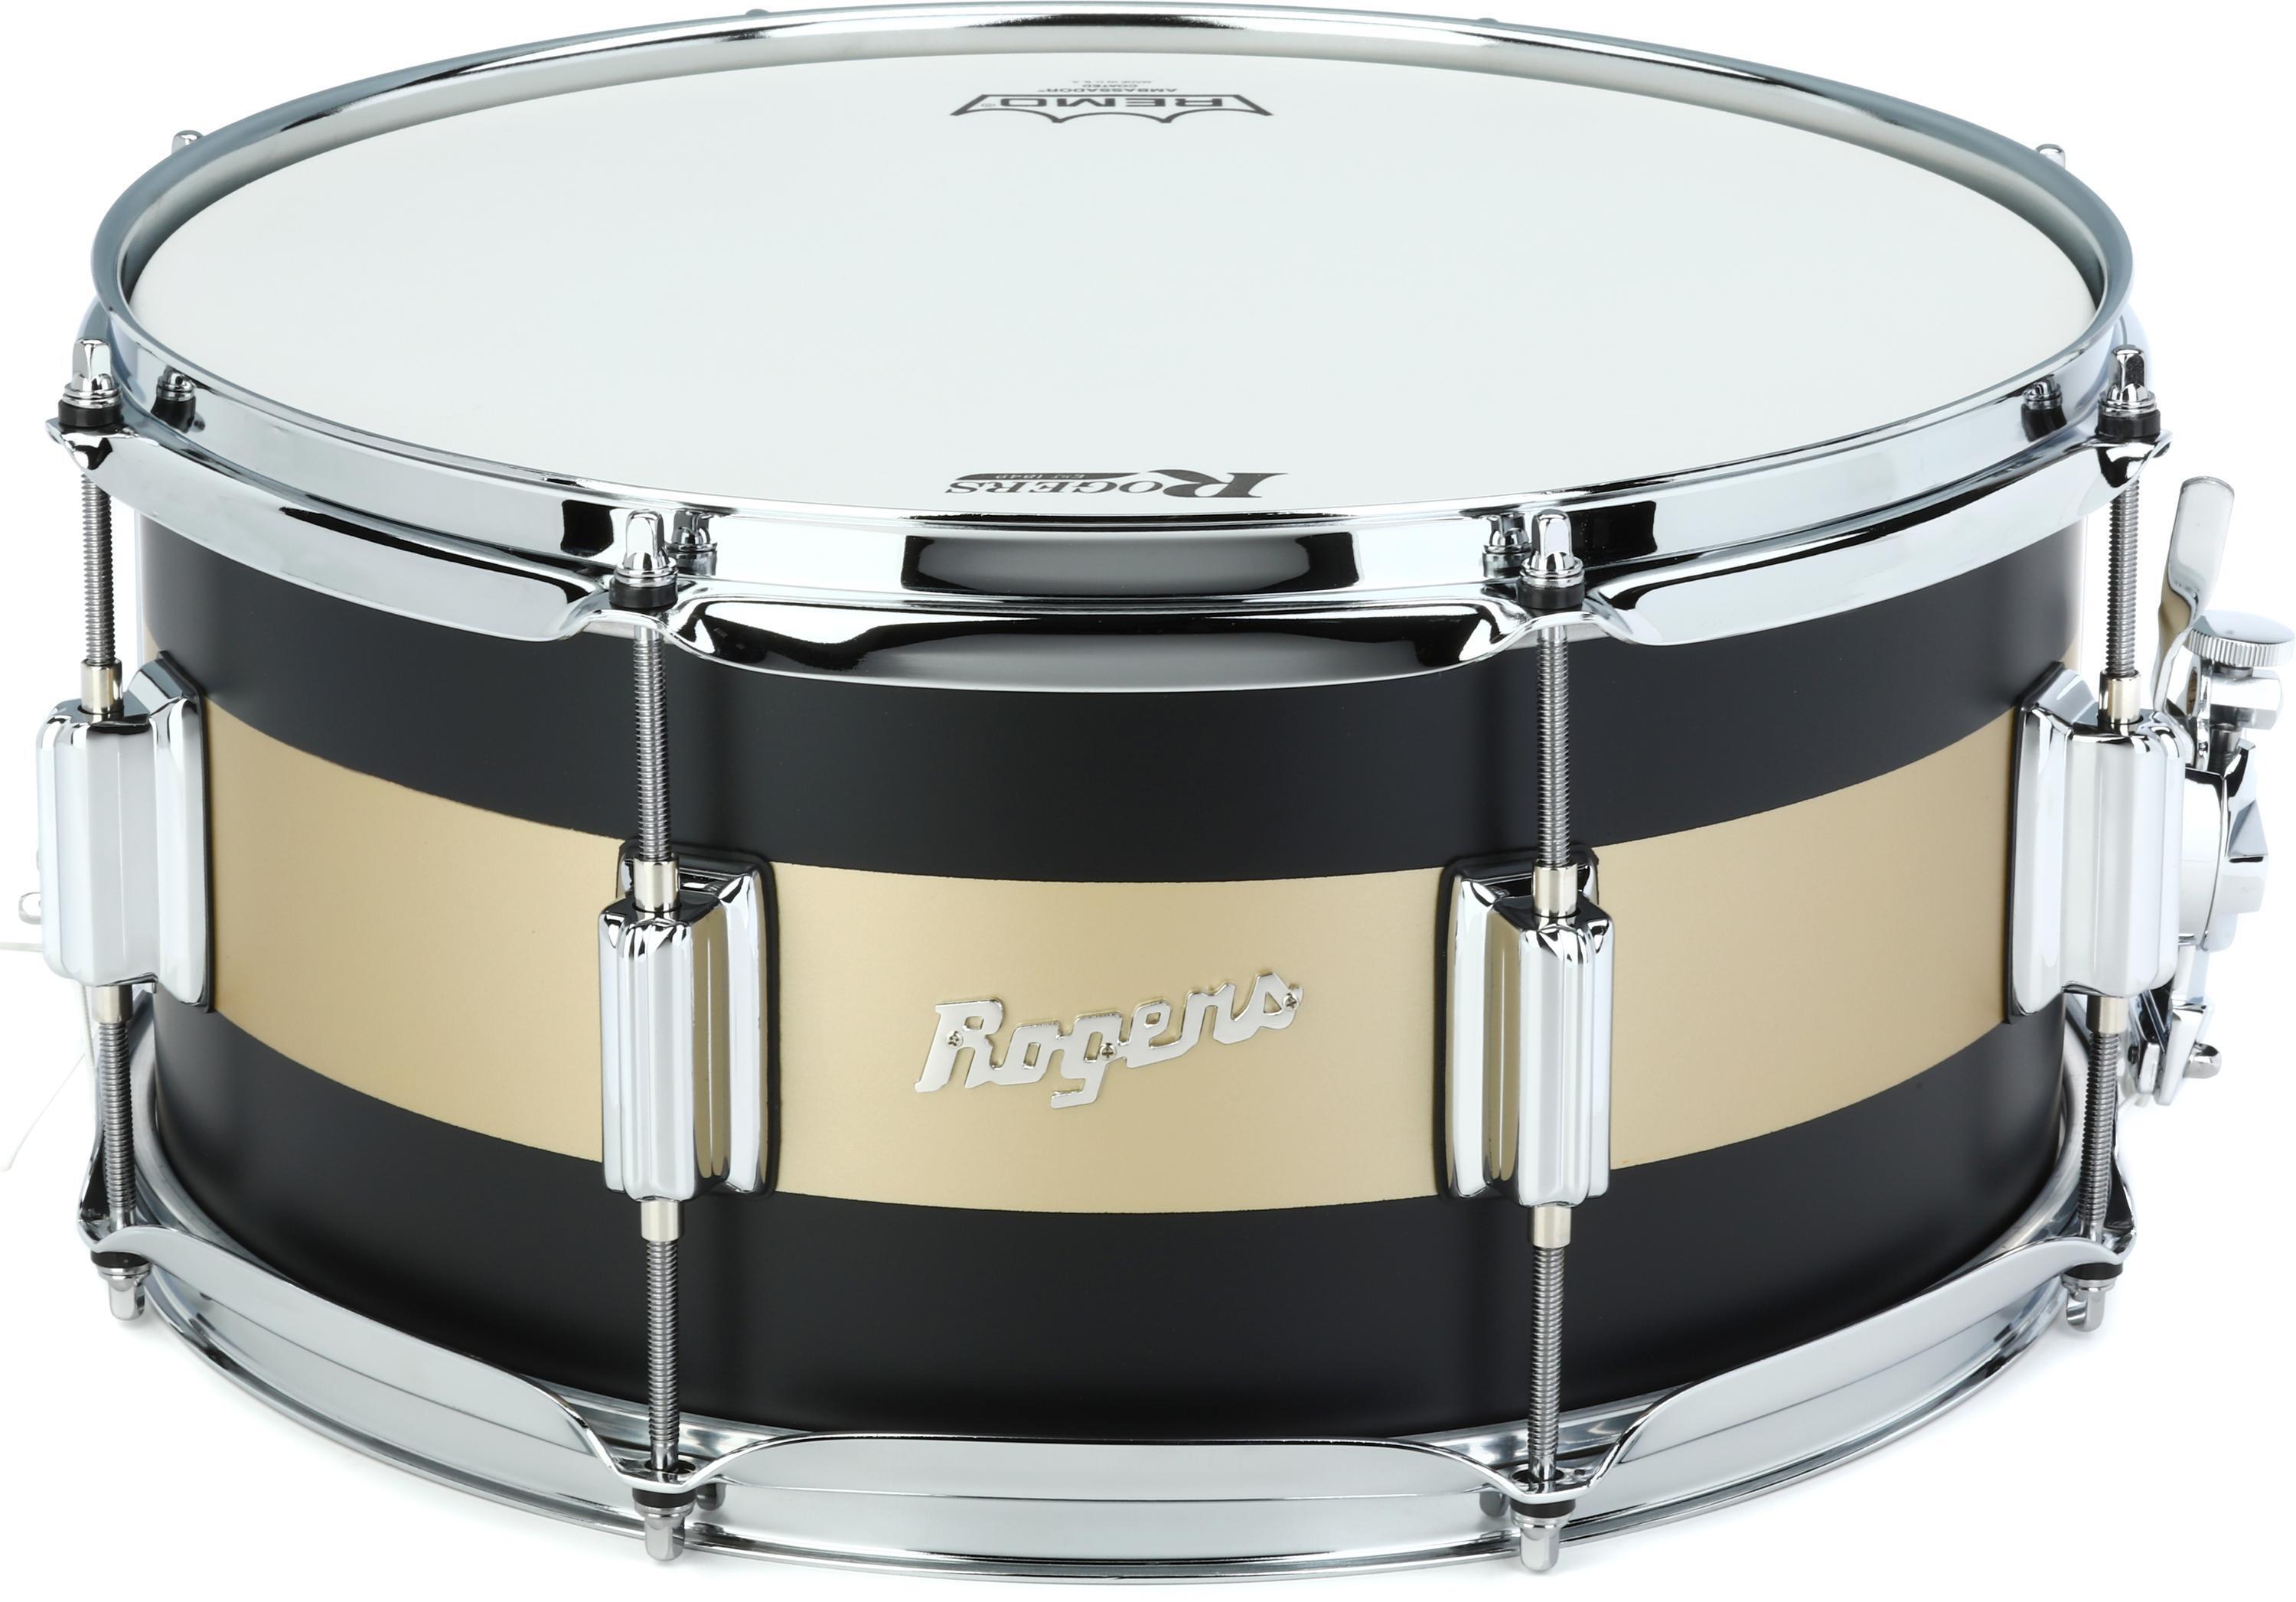 Rogers Drums Tower Series Snare Drum - 6.5-inch x 14-inch, Satin